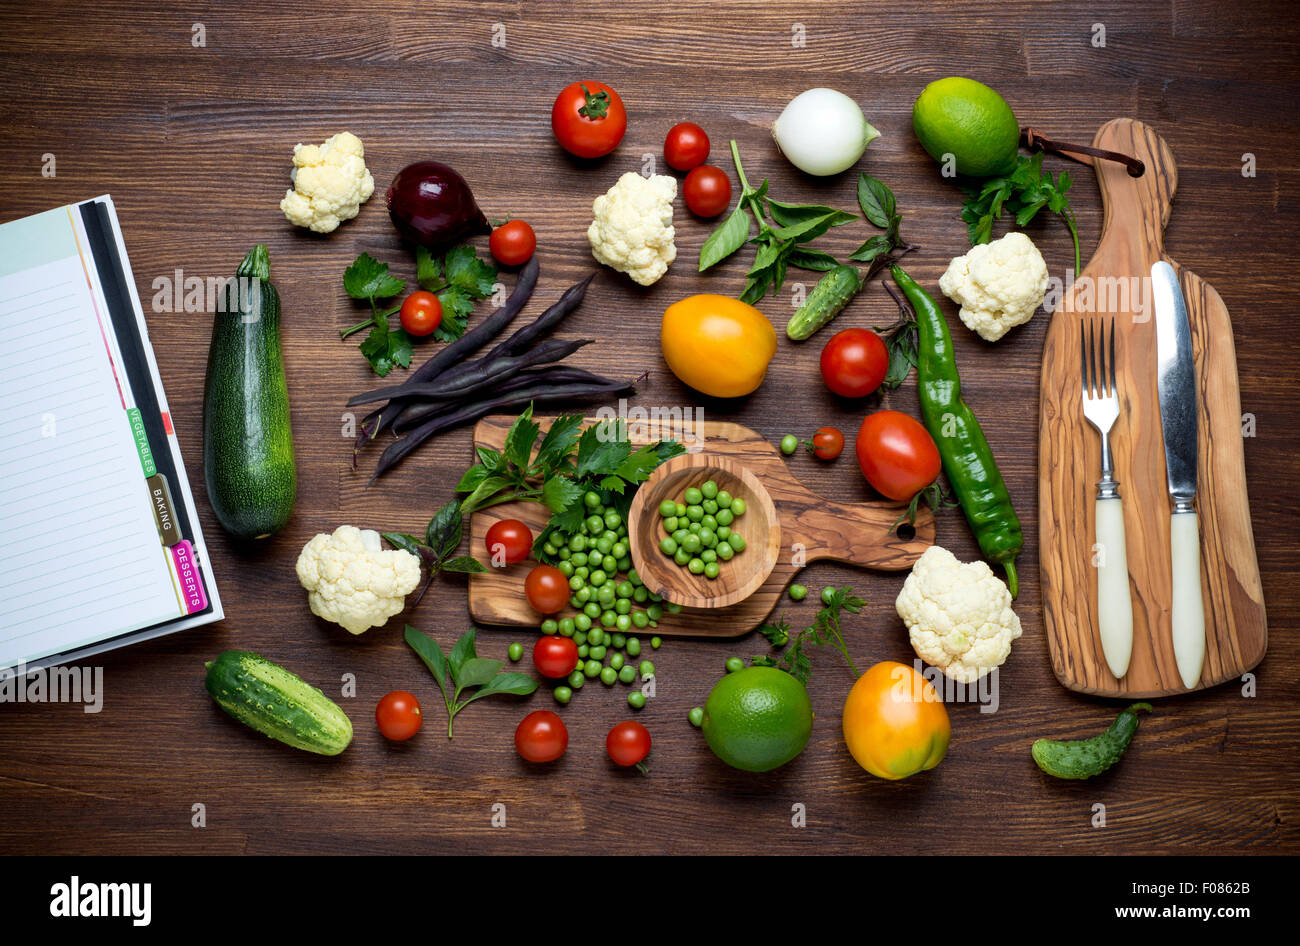 Healthy food. Herbs and vegetables on wooden table with recipe book. Top view. Stock Photo